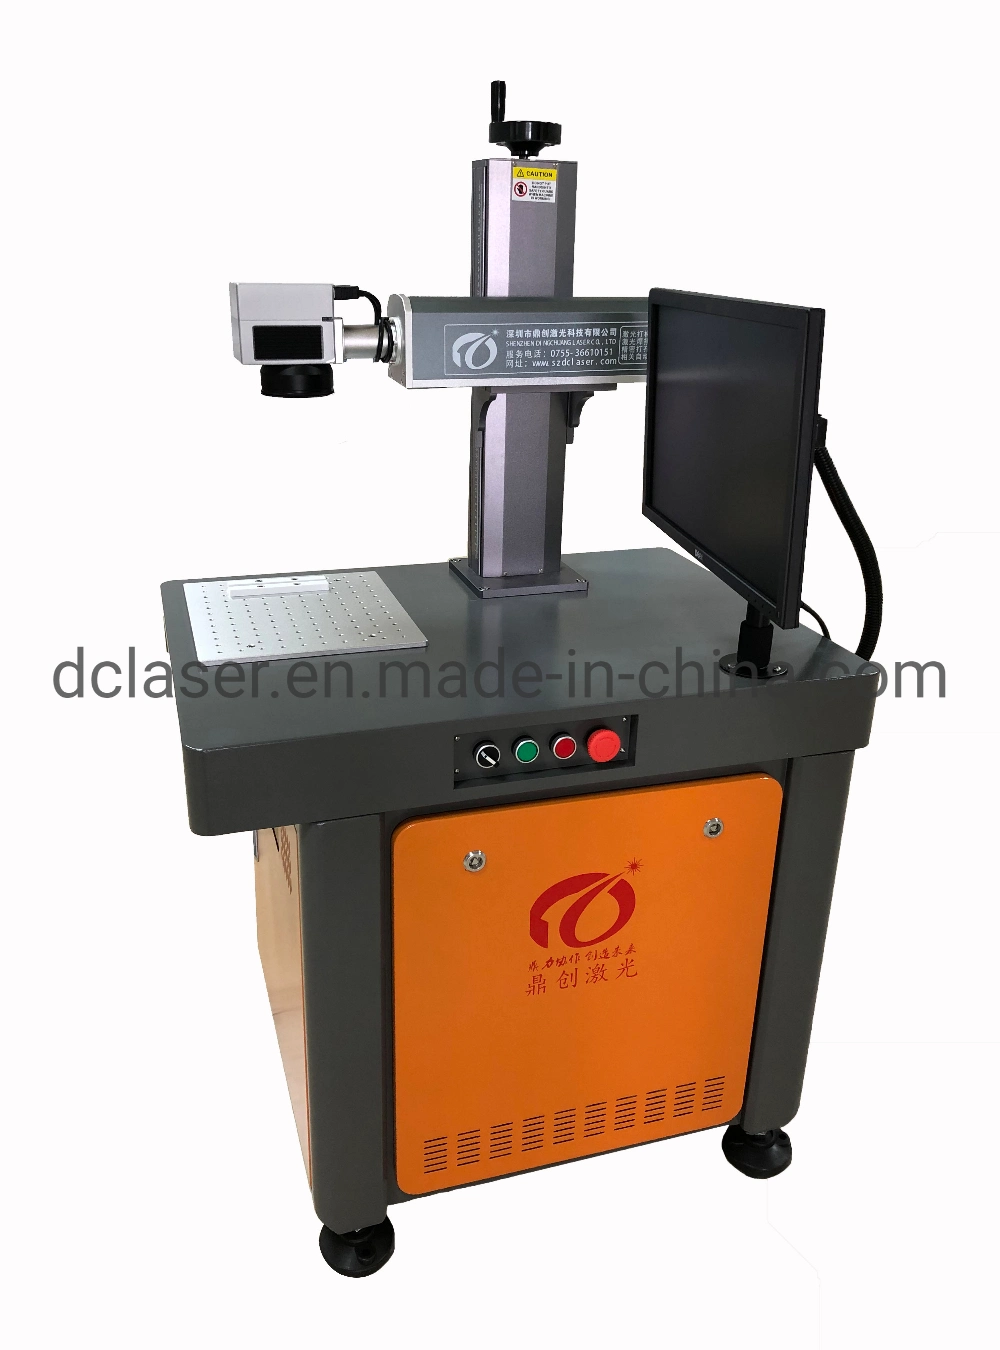 Optical Fiber Laser Marking Equipment Engraving for Metals and Non Metals with CE